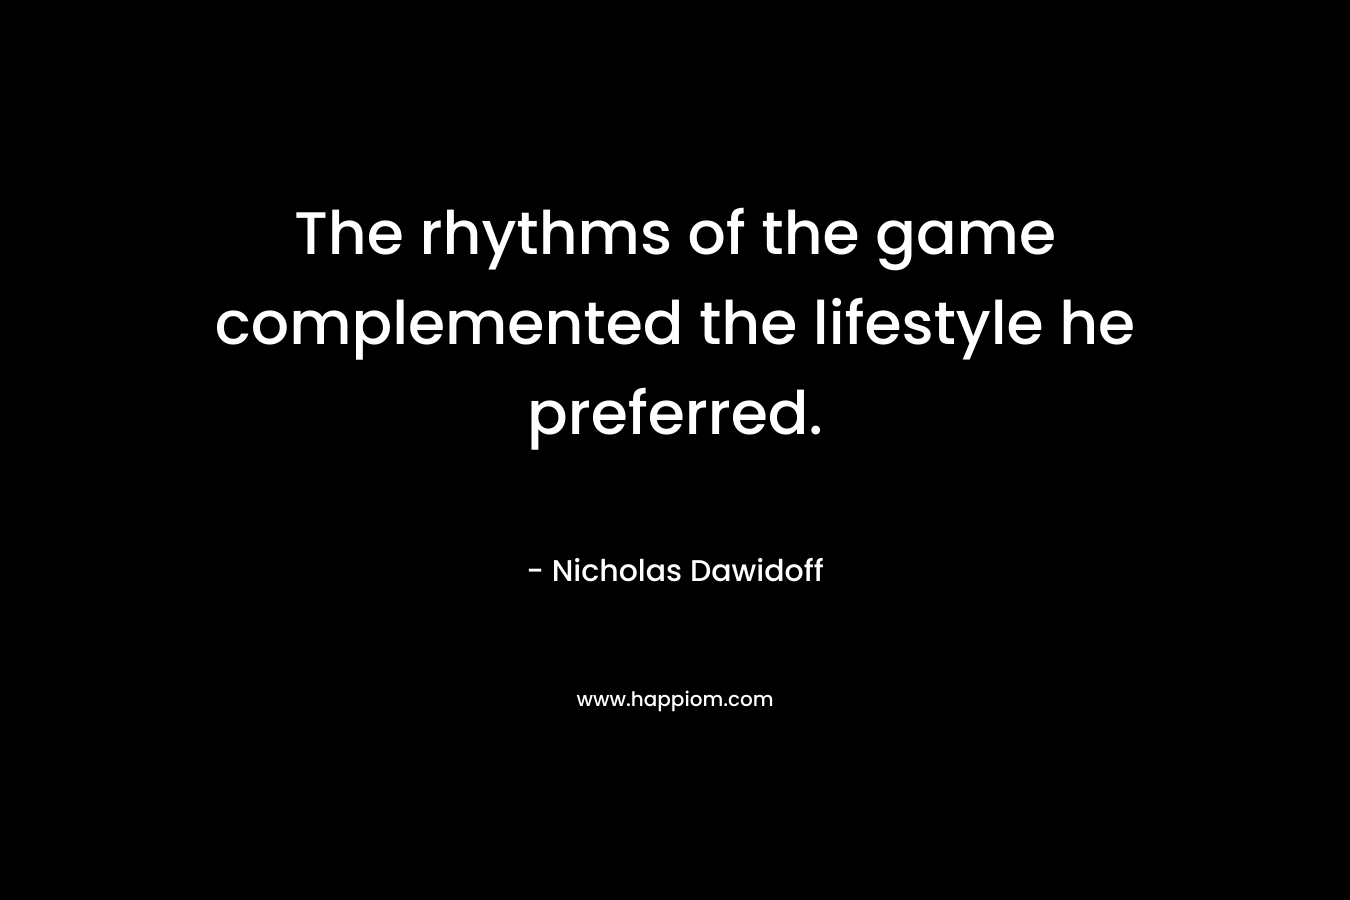 The rhythms of the game complemented the lifestyle he preferred.